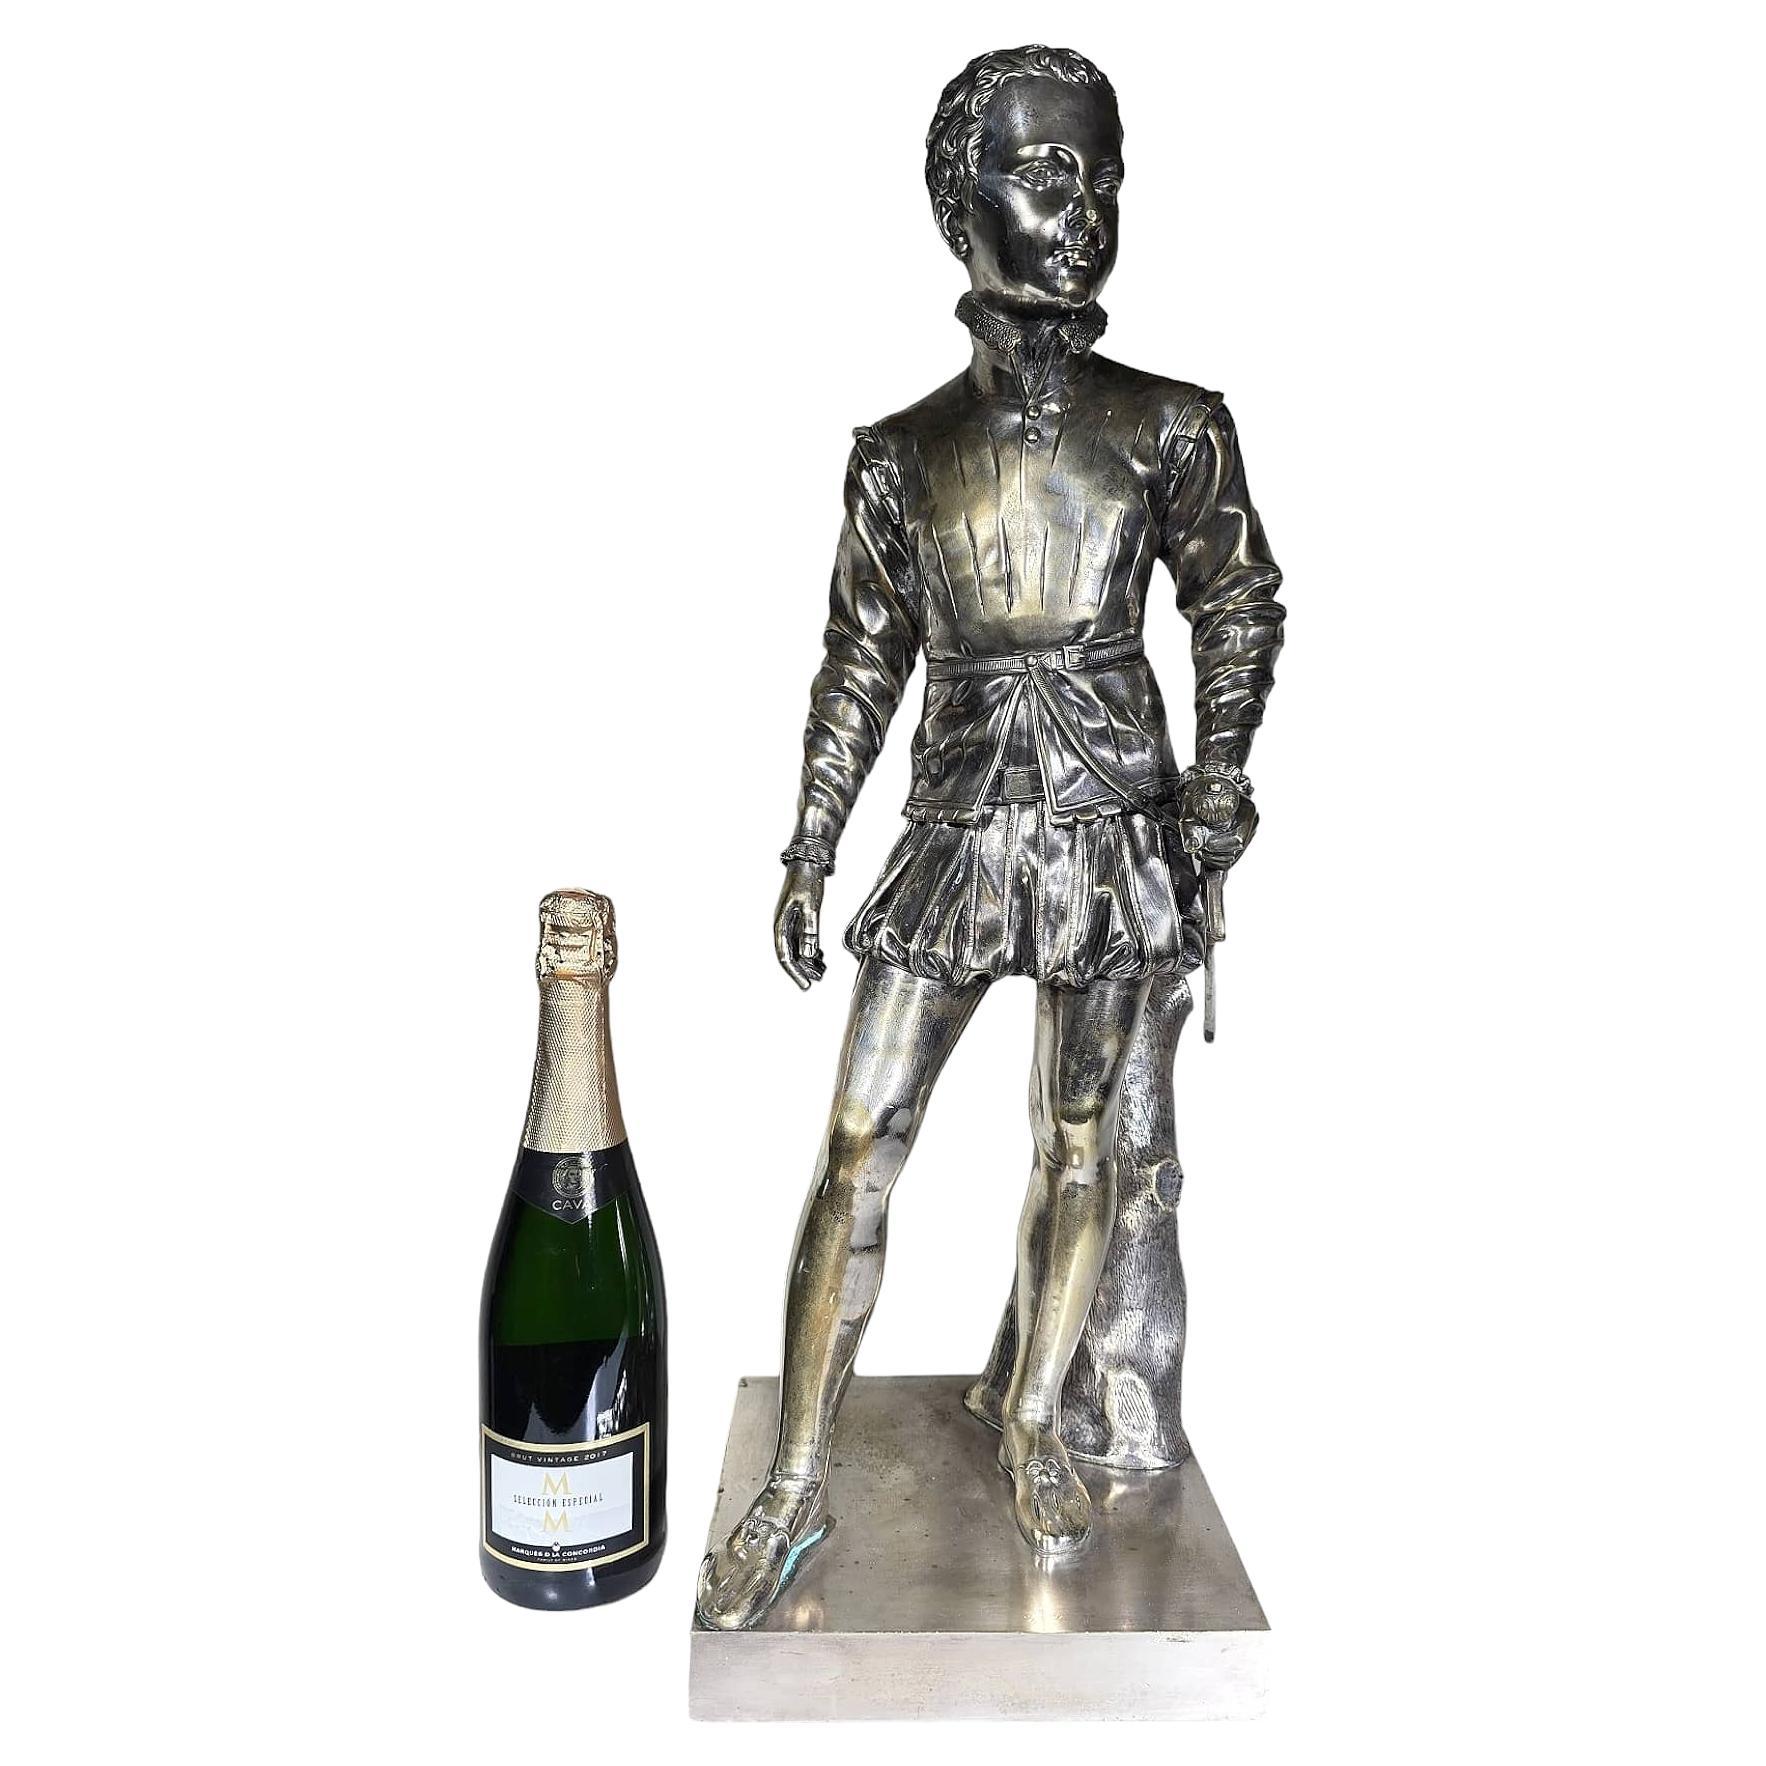  Discover the majesty of the King of France, Henry IV, with this Sculpture For Sale